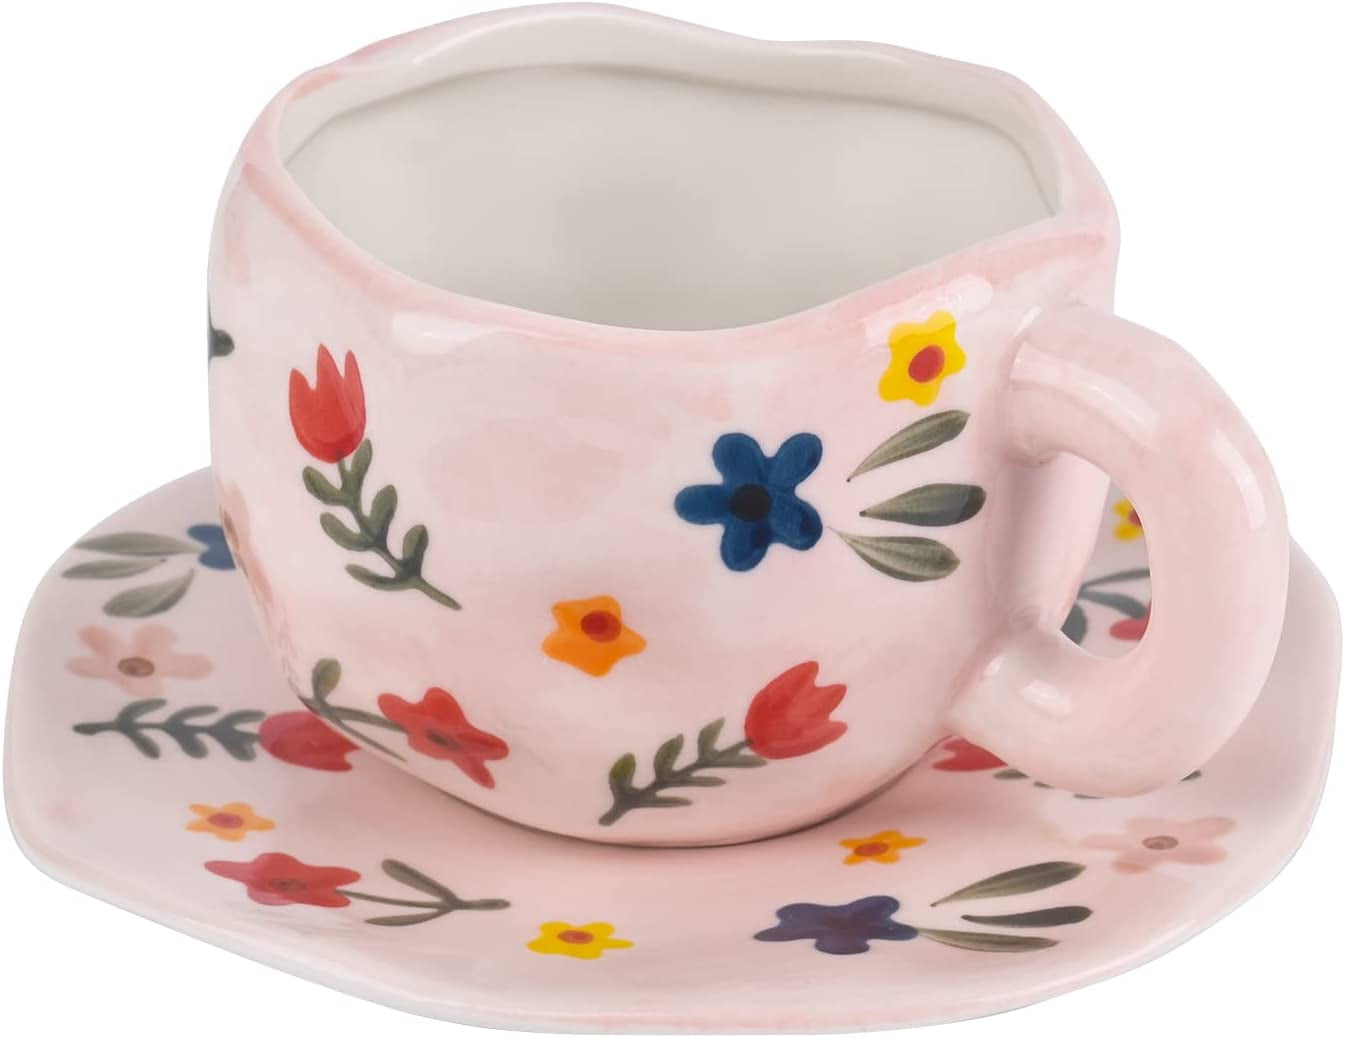 NOLITOY Ceramic Coffee Mug, Tulip Shape Coffee Cup, Cute Pink Cup for Women  with Saucer, 10 oz/300 m…See more NOLITOY Ceramic Coffee Mug, Tulip Shape